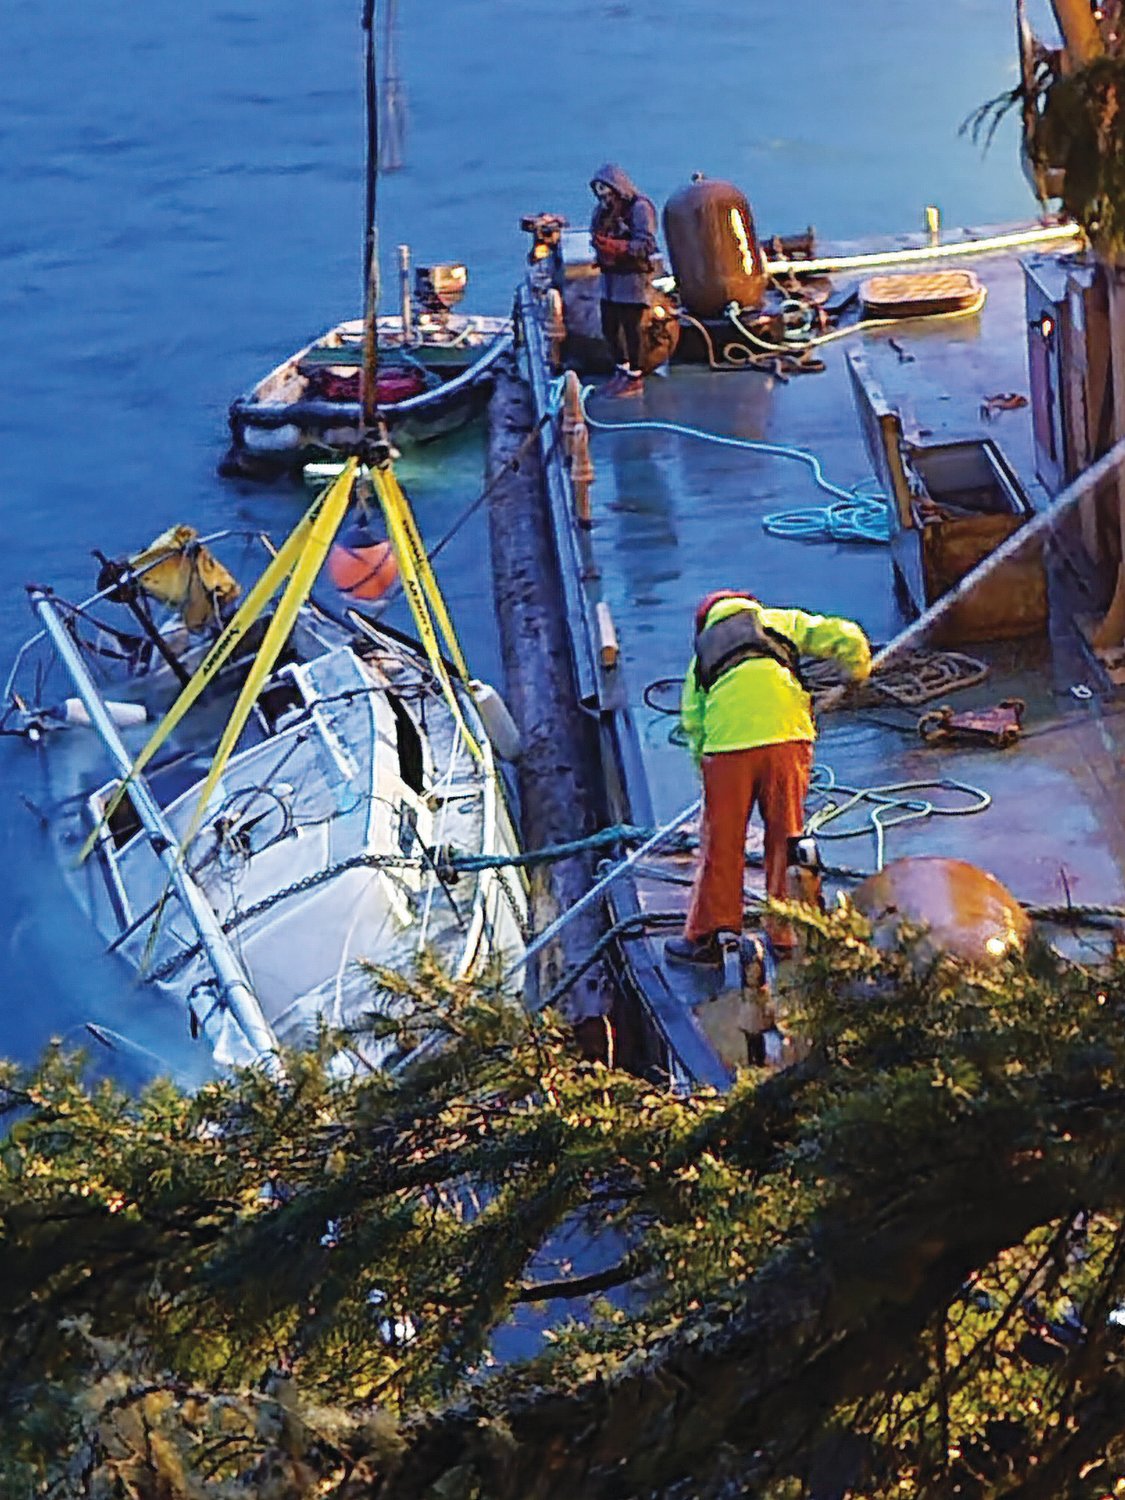 A salvage team works to remove a sunken 27-foot sailboat from Portage Canal near the Indian Island Bridge.